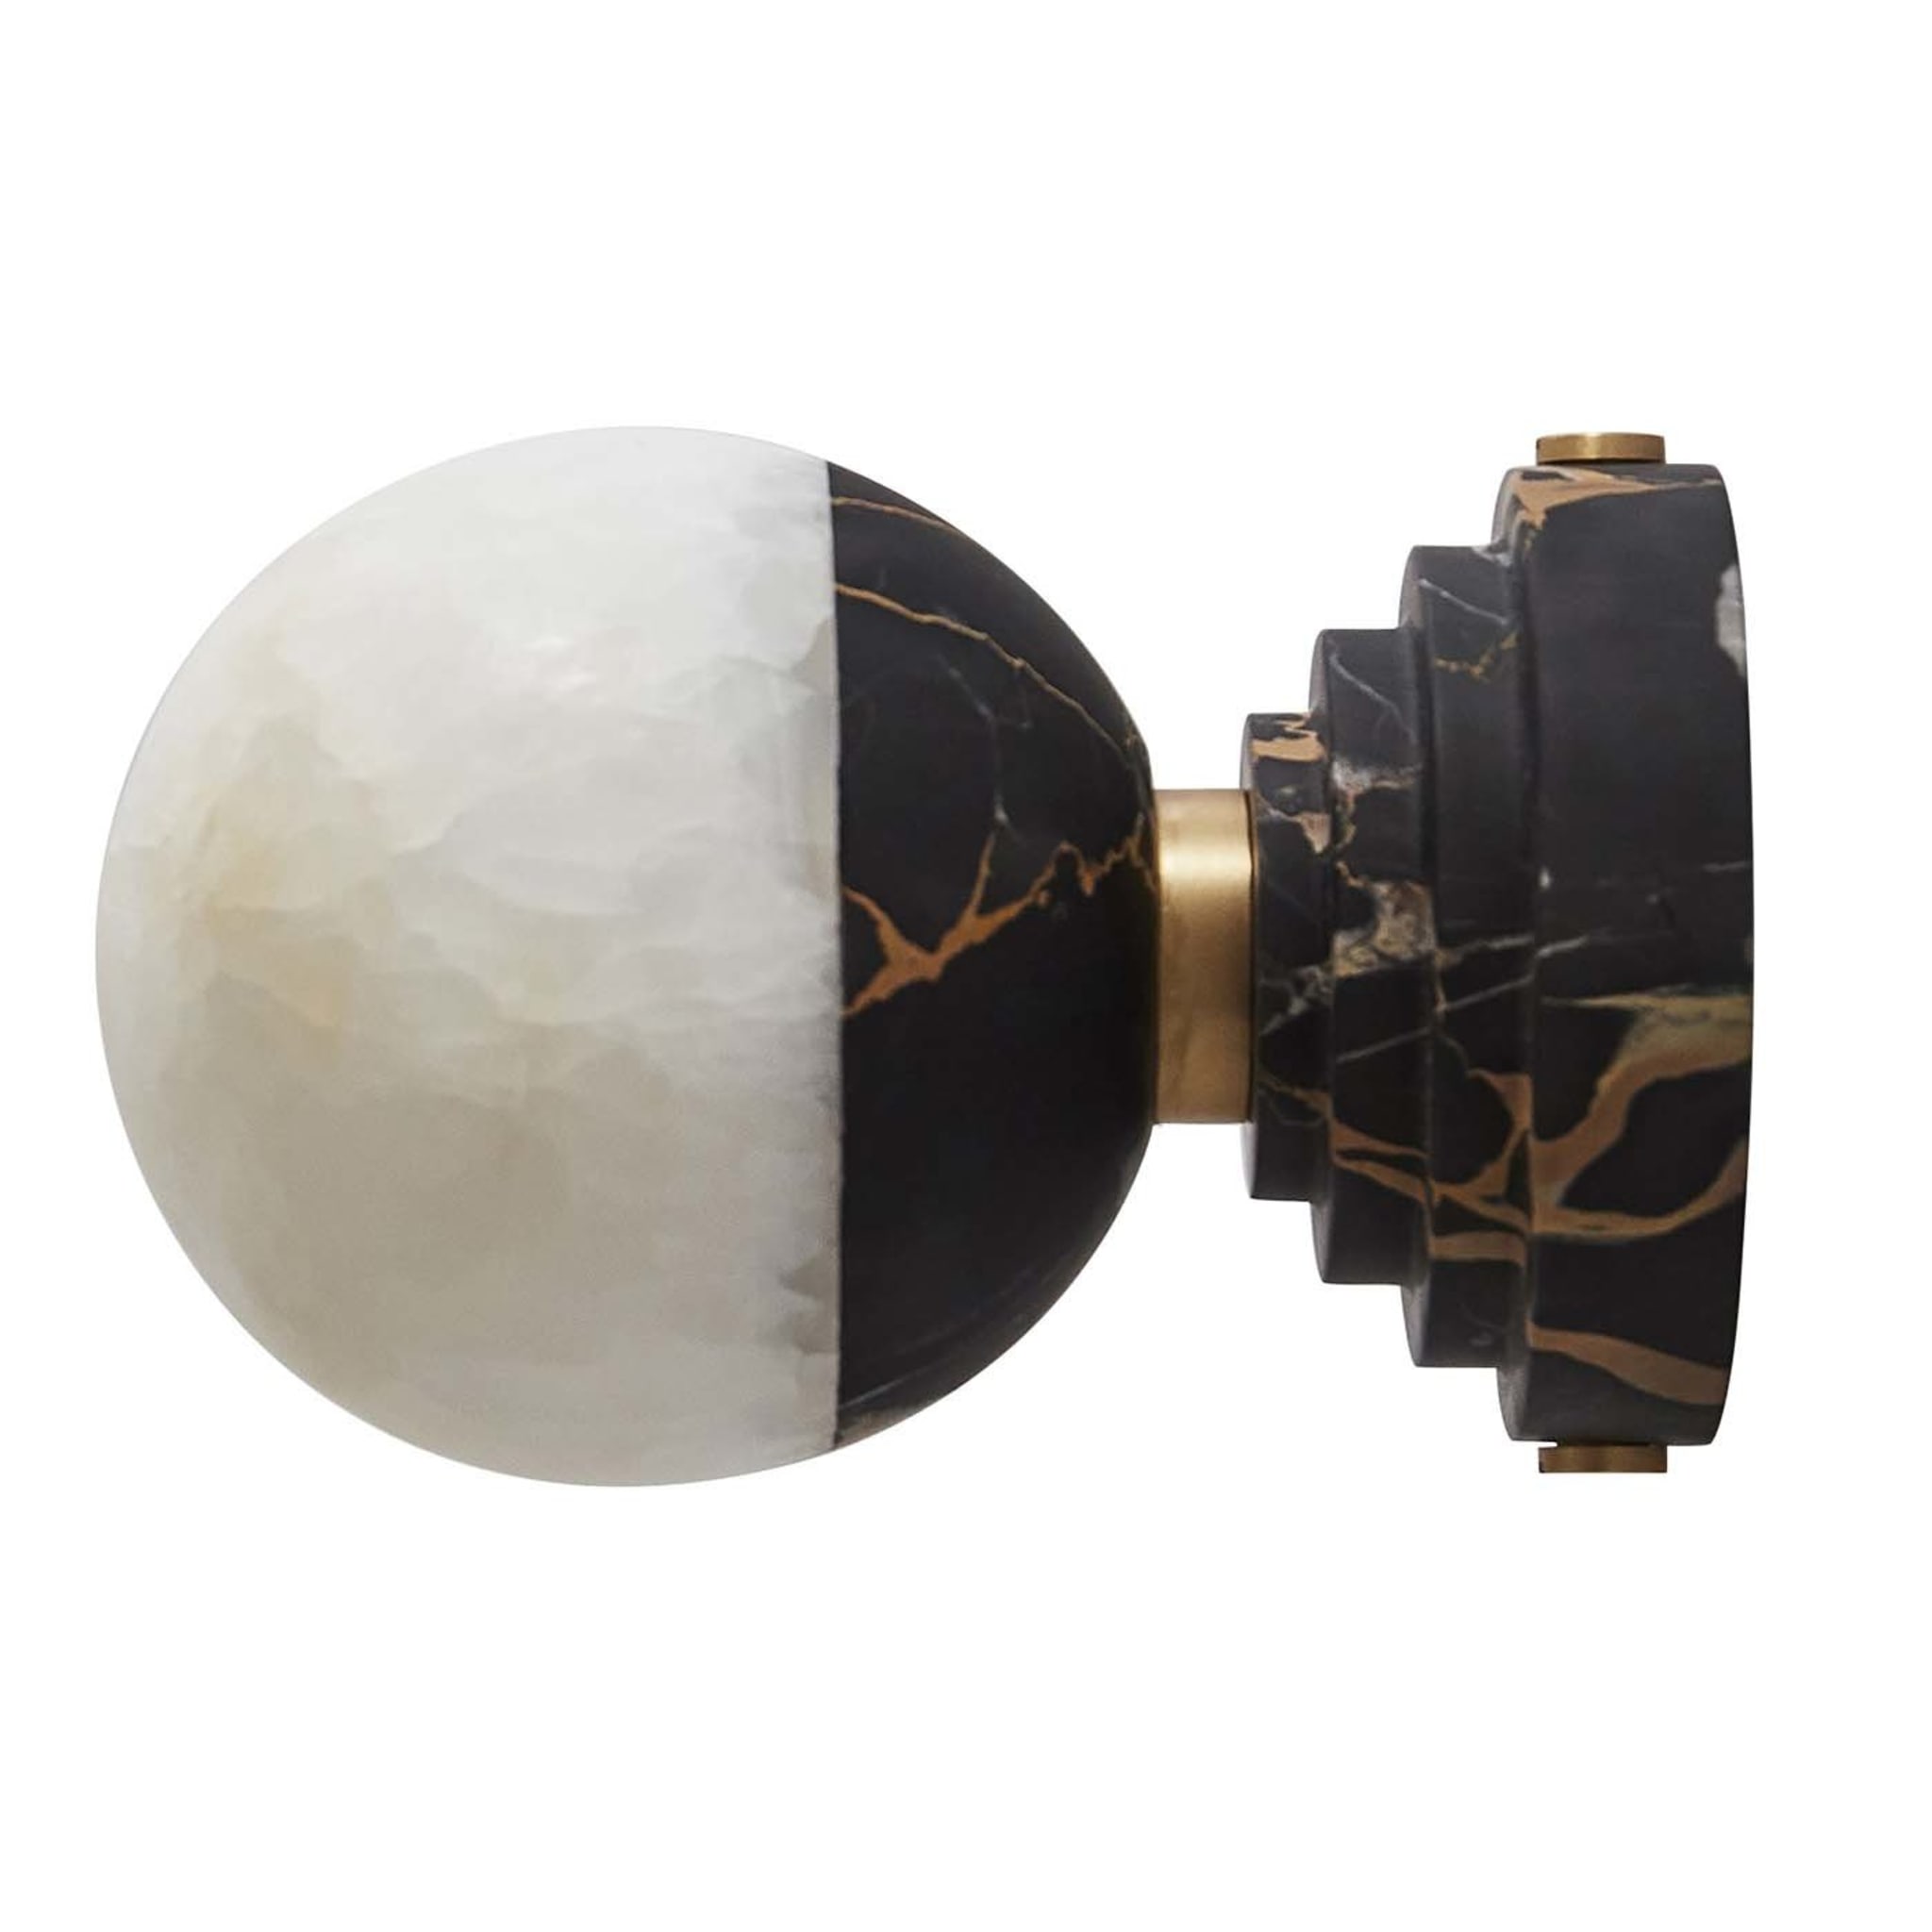 Lunar Sconce in Portoro Marble and Onyx  - Main view